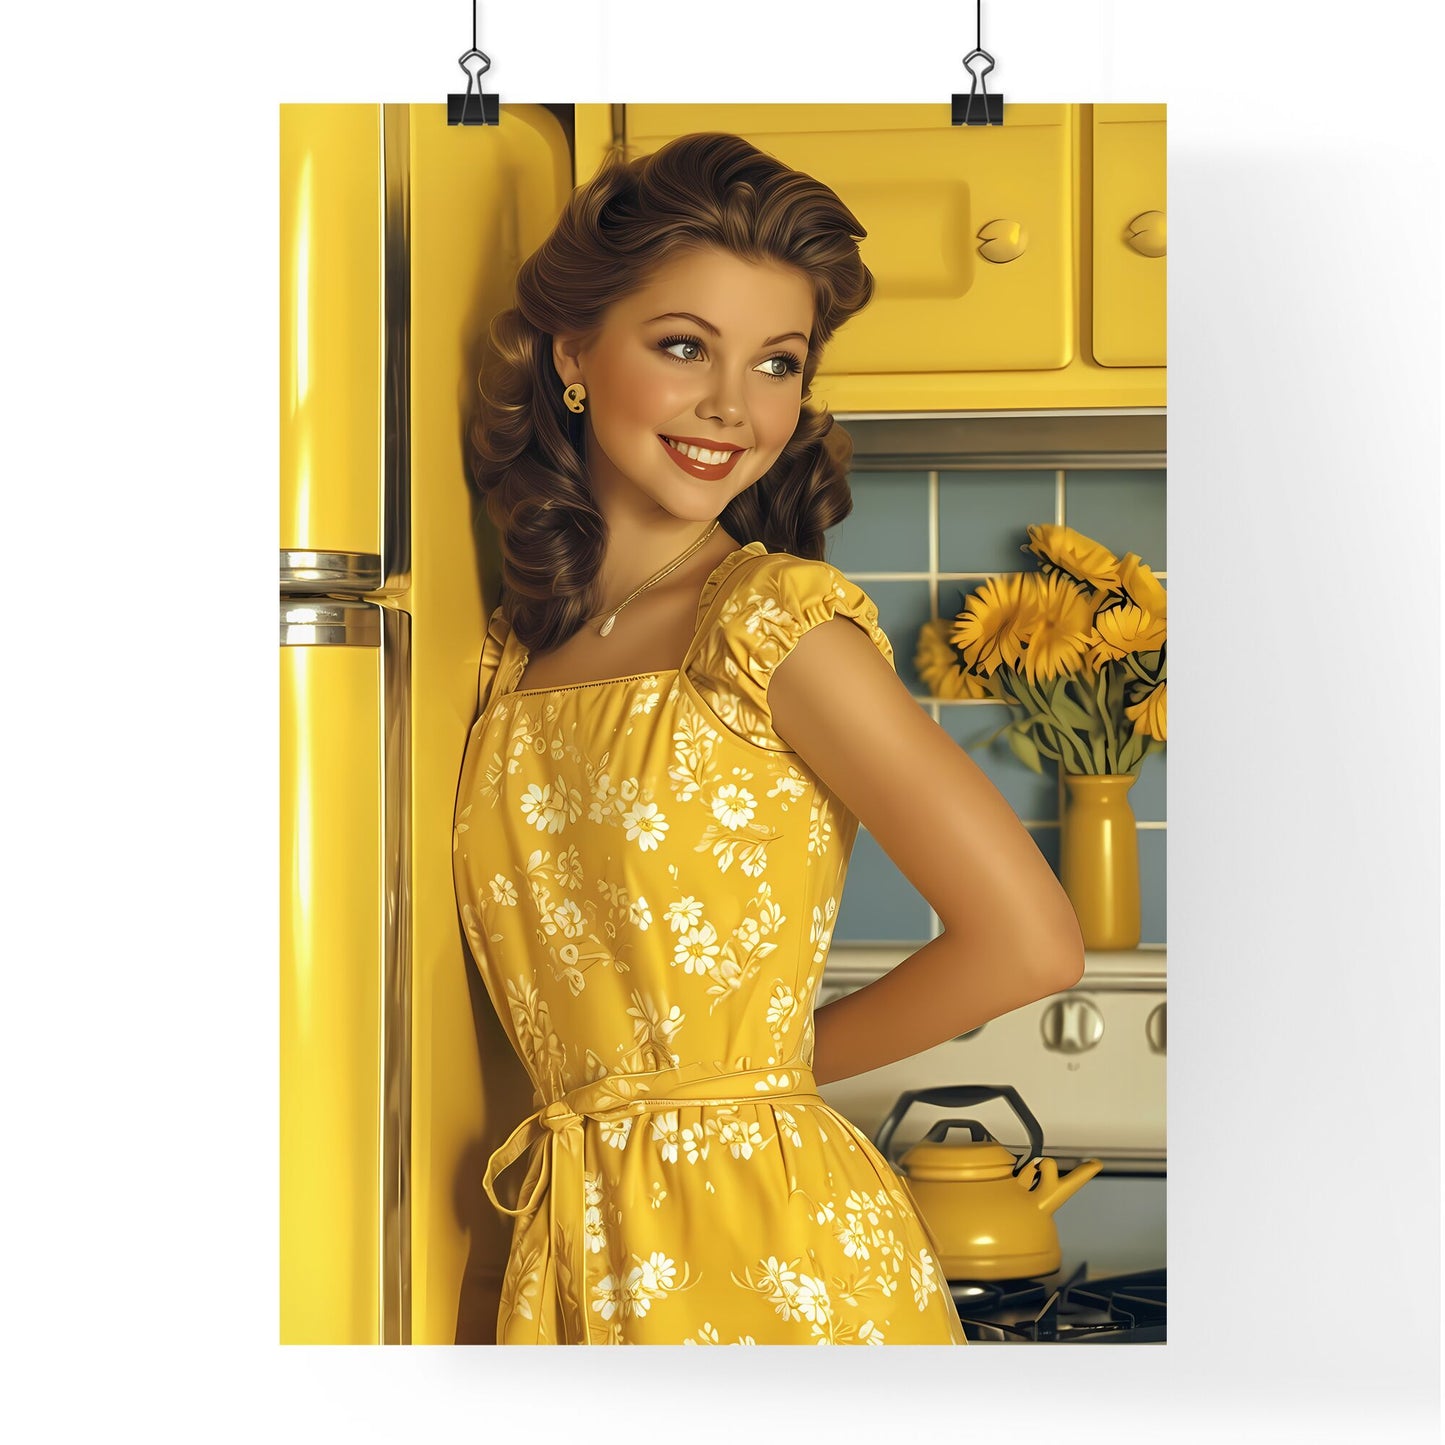 A young woman cleaning a stain off her apron - Art print of a woman in a yellow dress Default Title